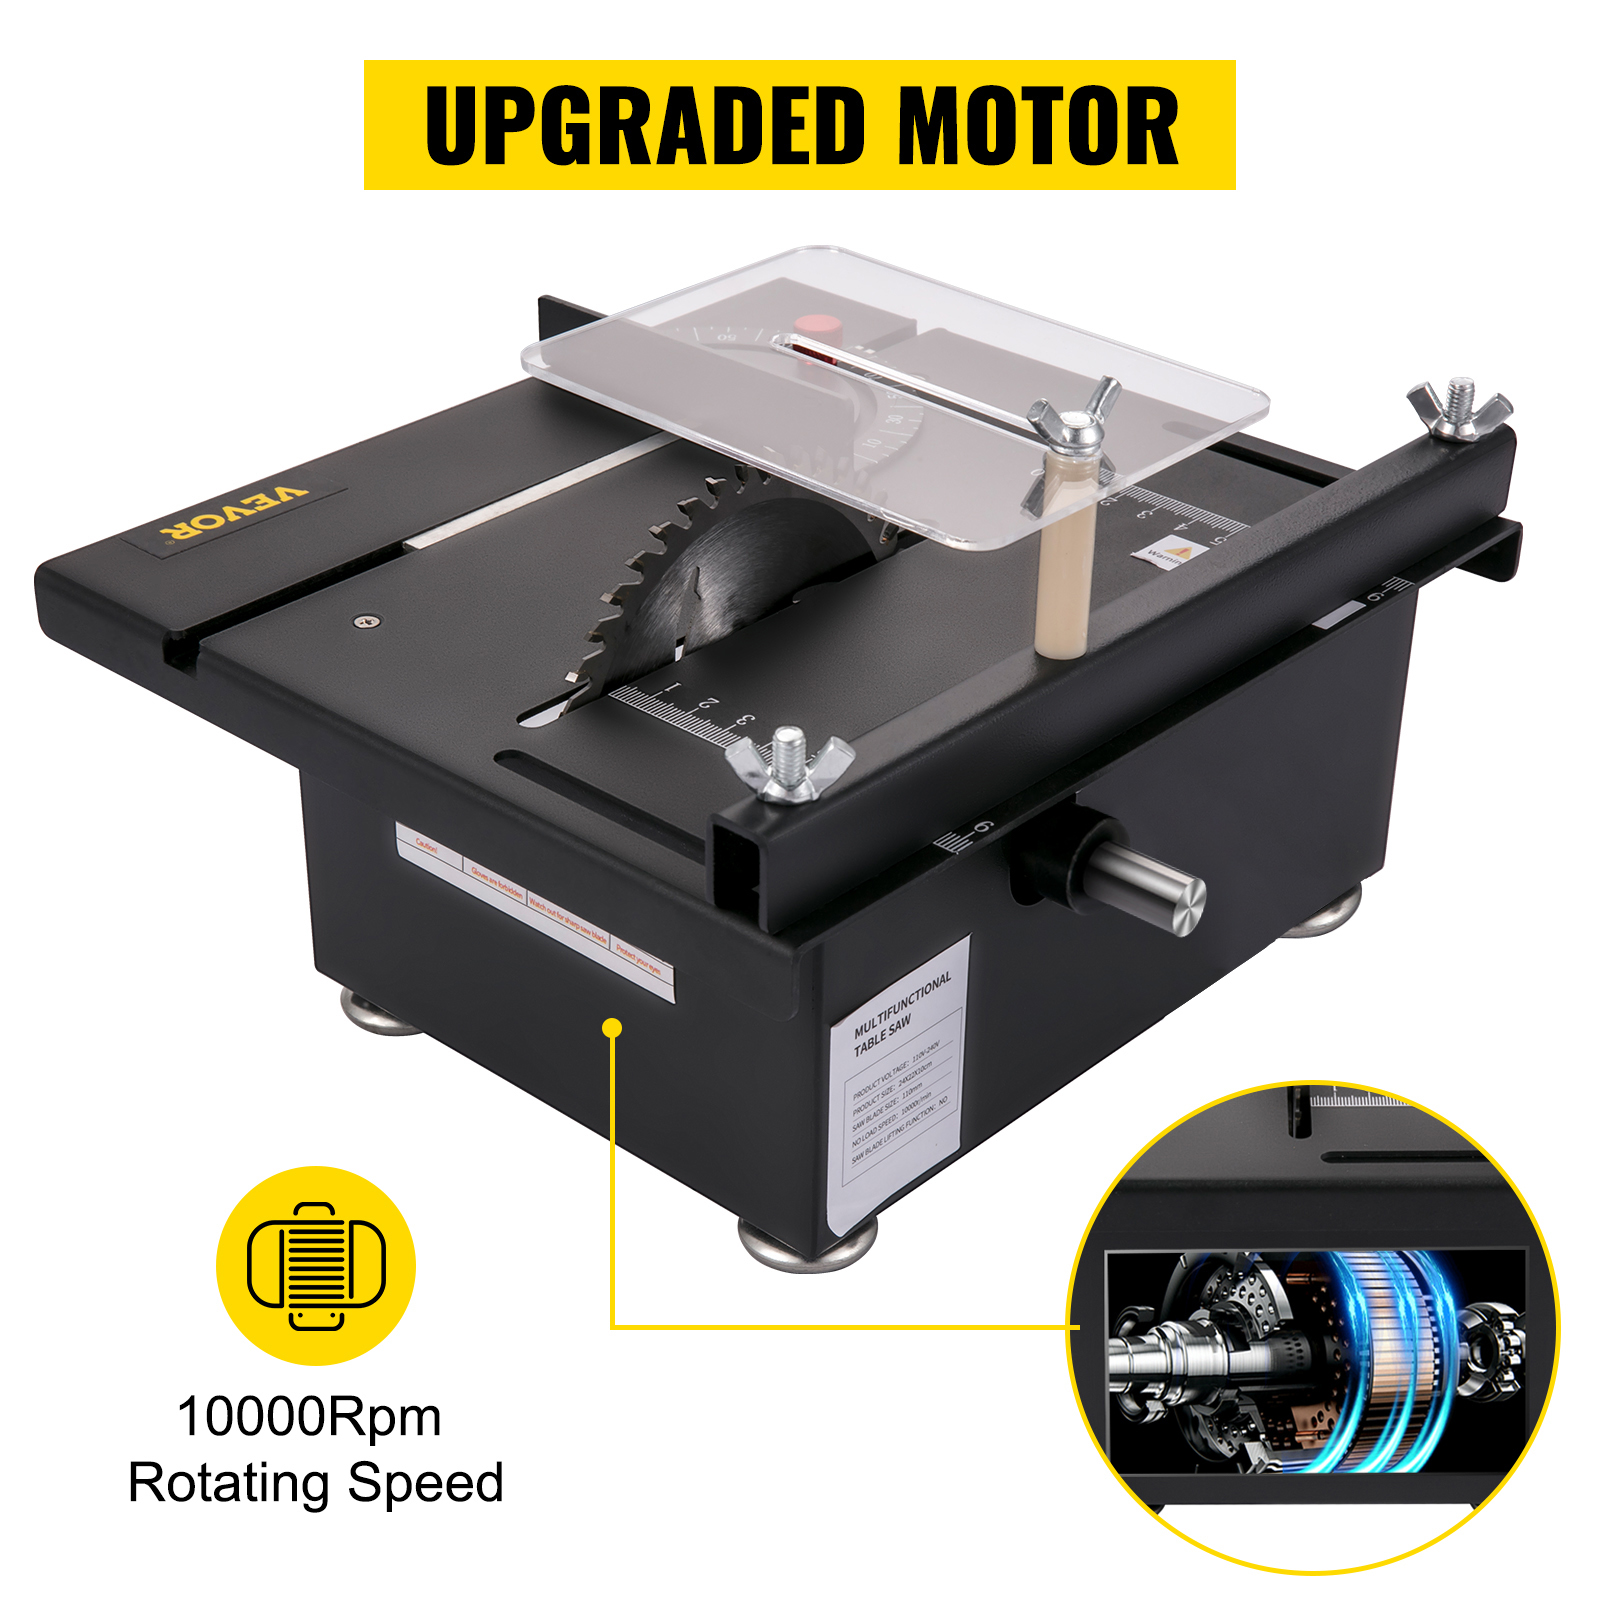 VEVOR VEVOR Mini Table Saw, 96W Hobby Table Saw for Woodworking, 0-90 Angle  Cutting Portable DIY Saw, 7-Level Speed Adjustable Multifunctional Table  Saws, 1.57in Cutting Depth Mini Precision Table Saw VEVOR EU